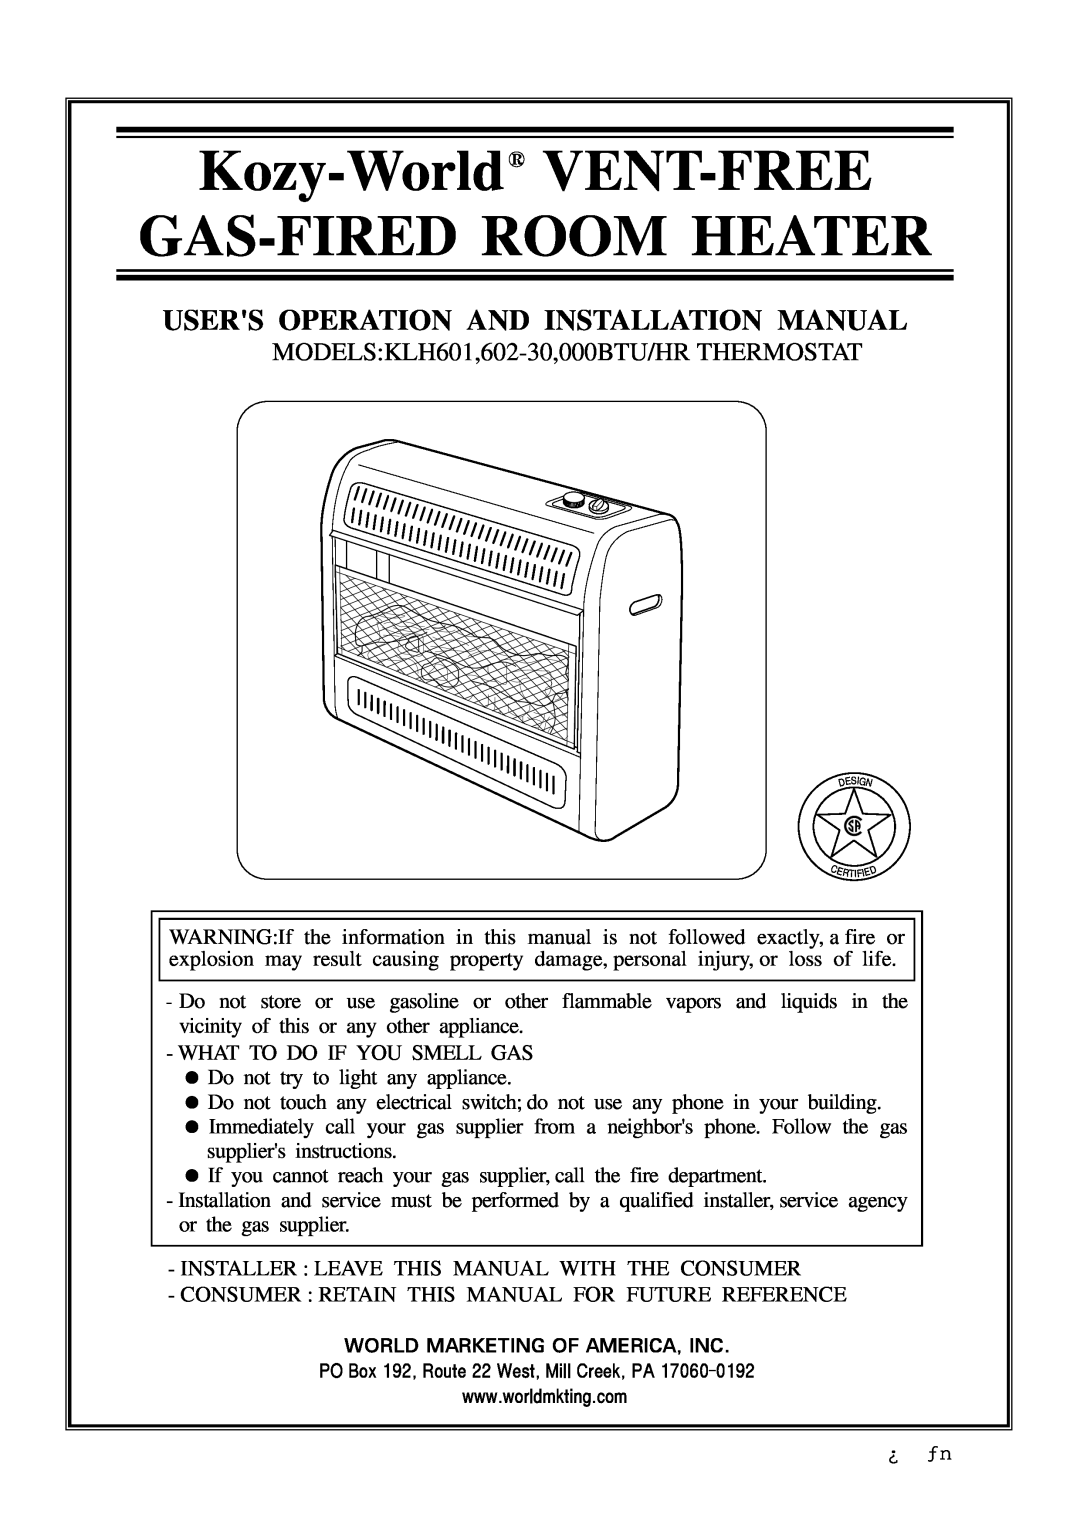 Gas-Fired Products 602-30, KLH601 installation manual Kozy-World VENT-FREE GAS-FIREDROOM HEATER 